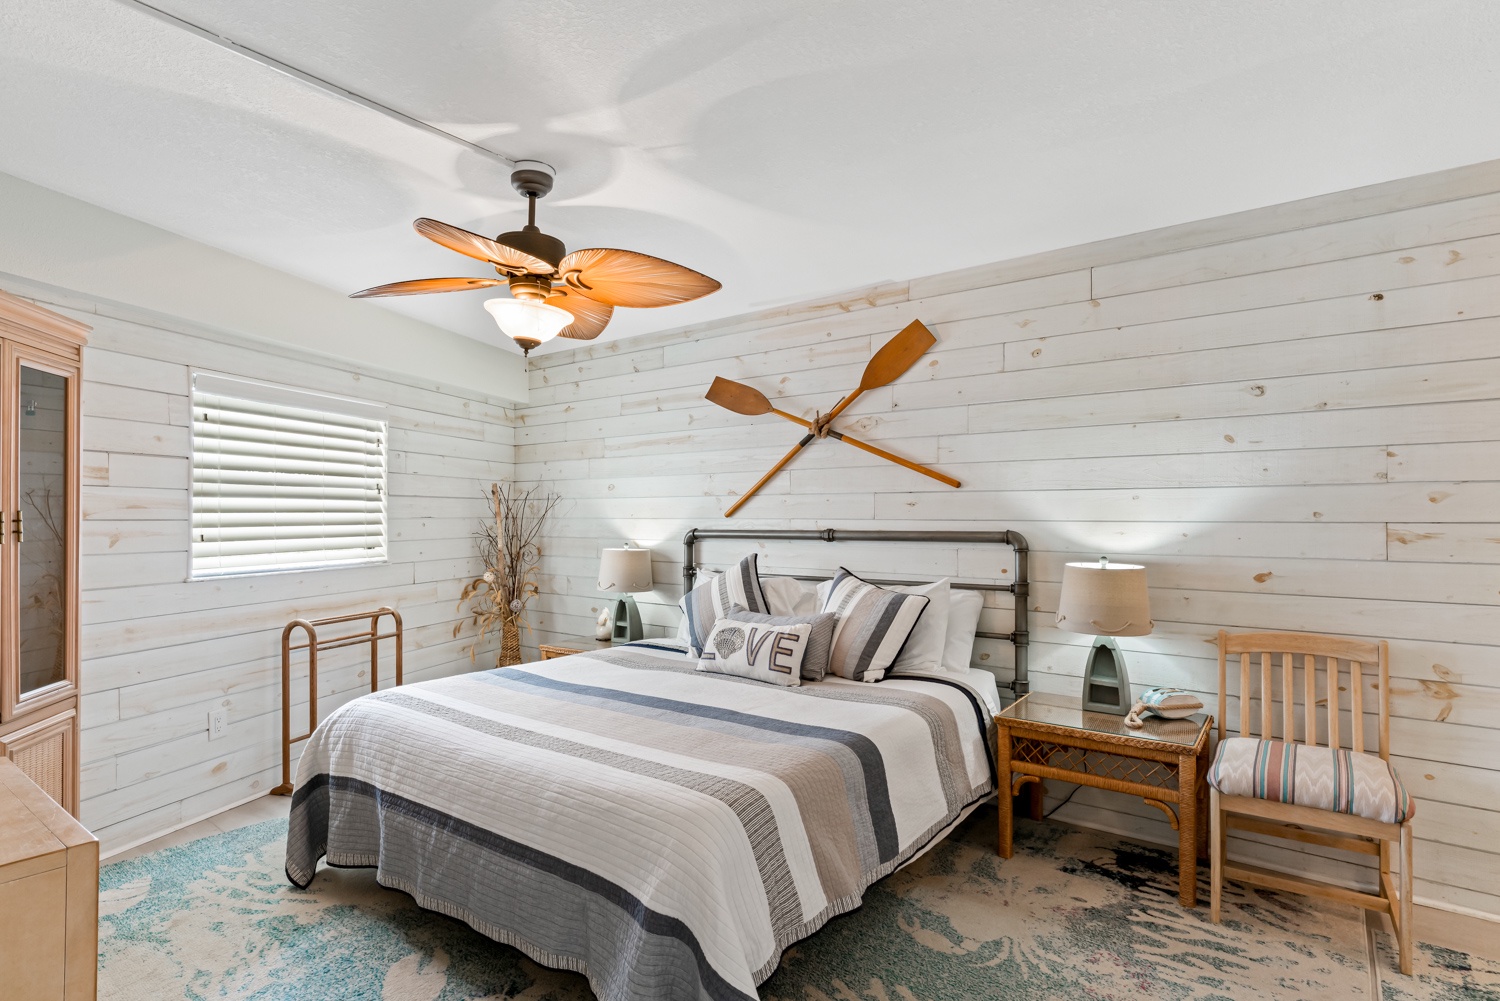 King size bed and ceiling fan